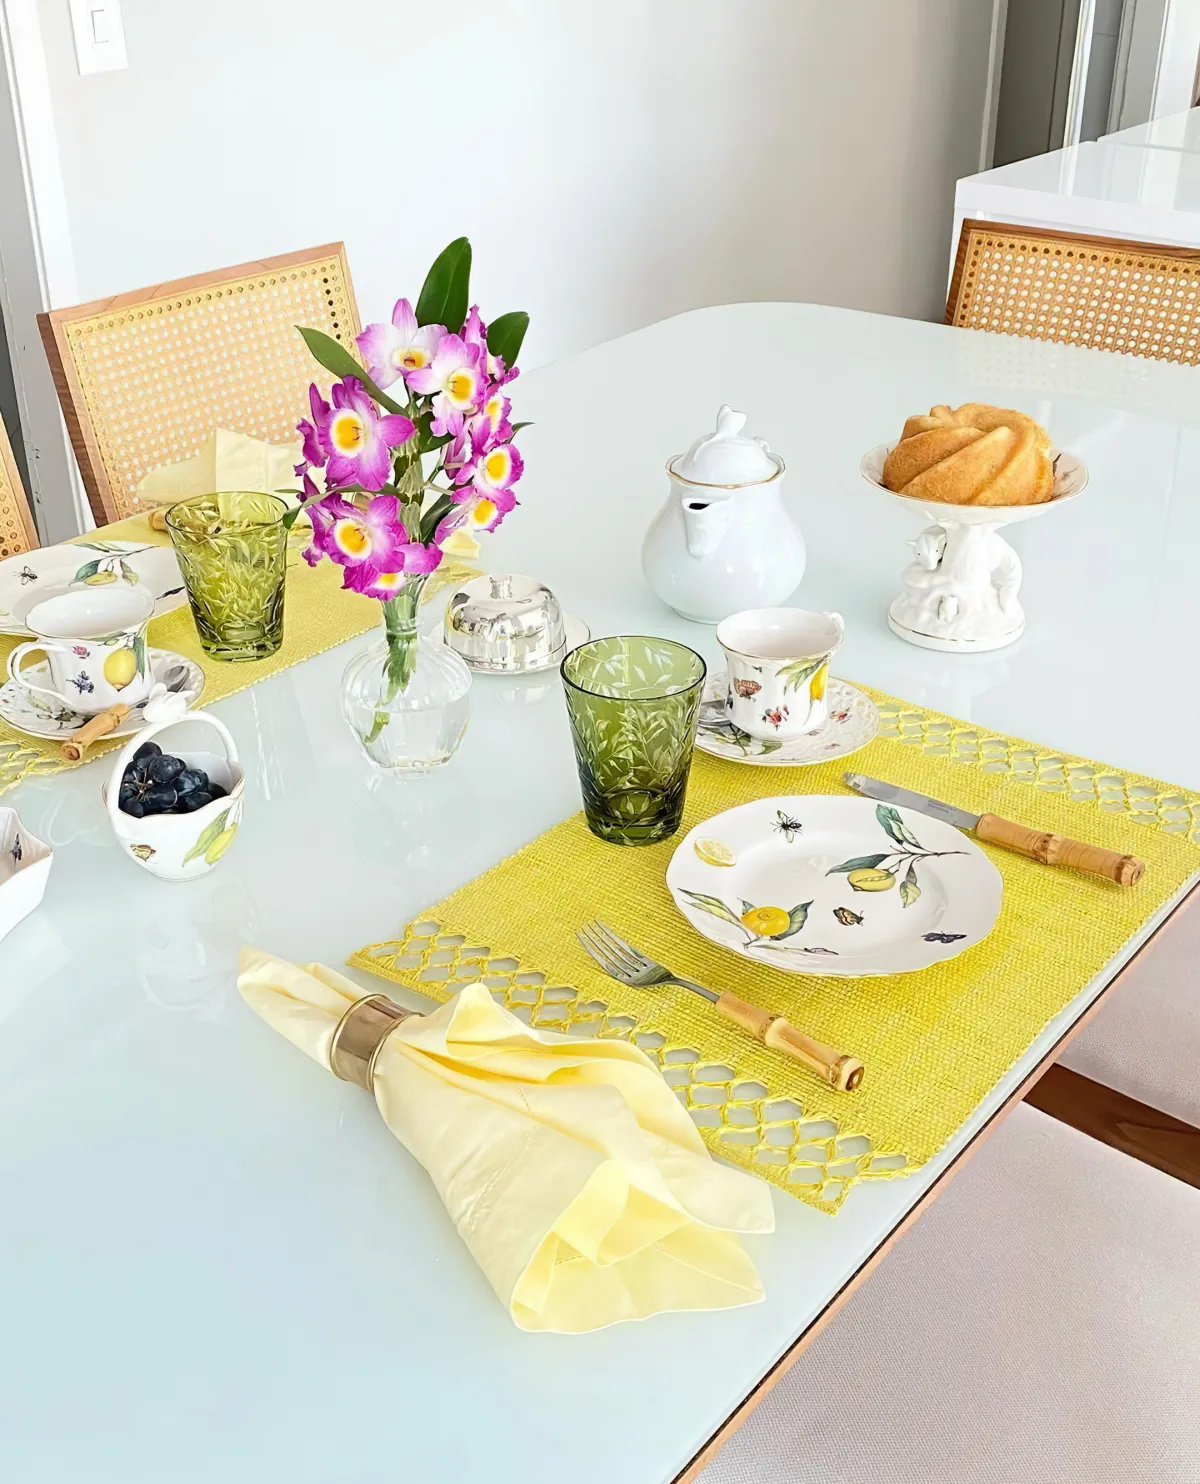 Table decoration in yellow with real flowers, crockery, citrus fruits